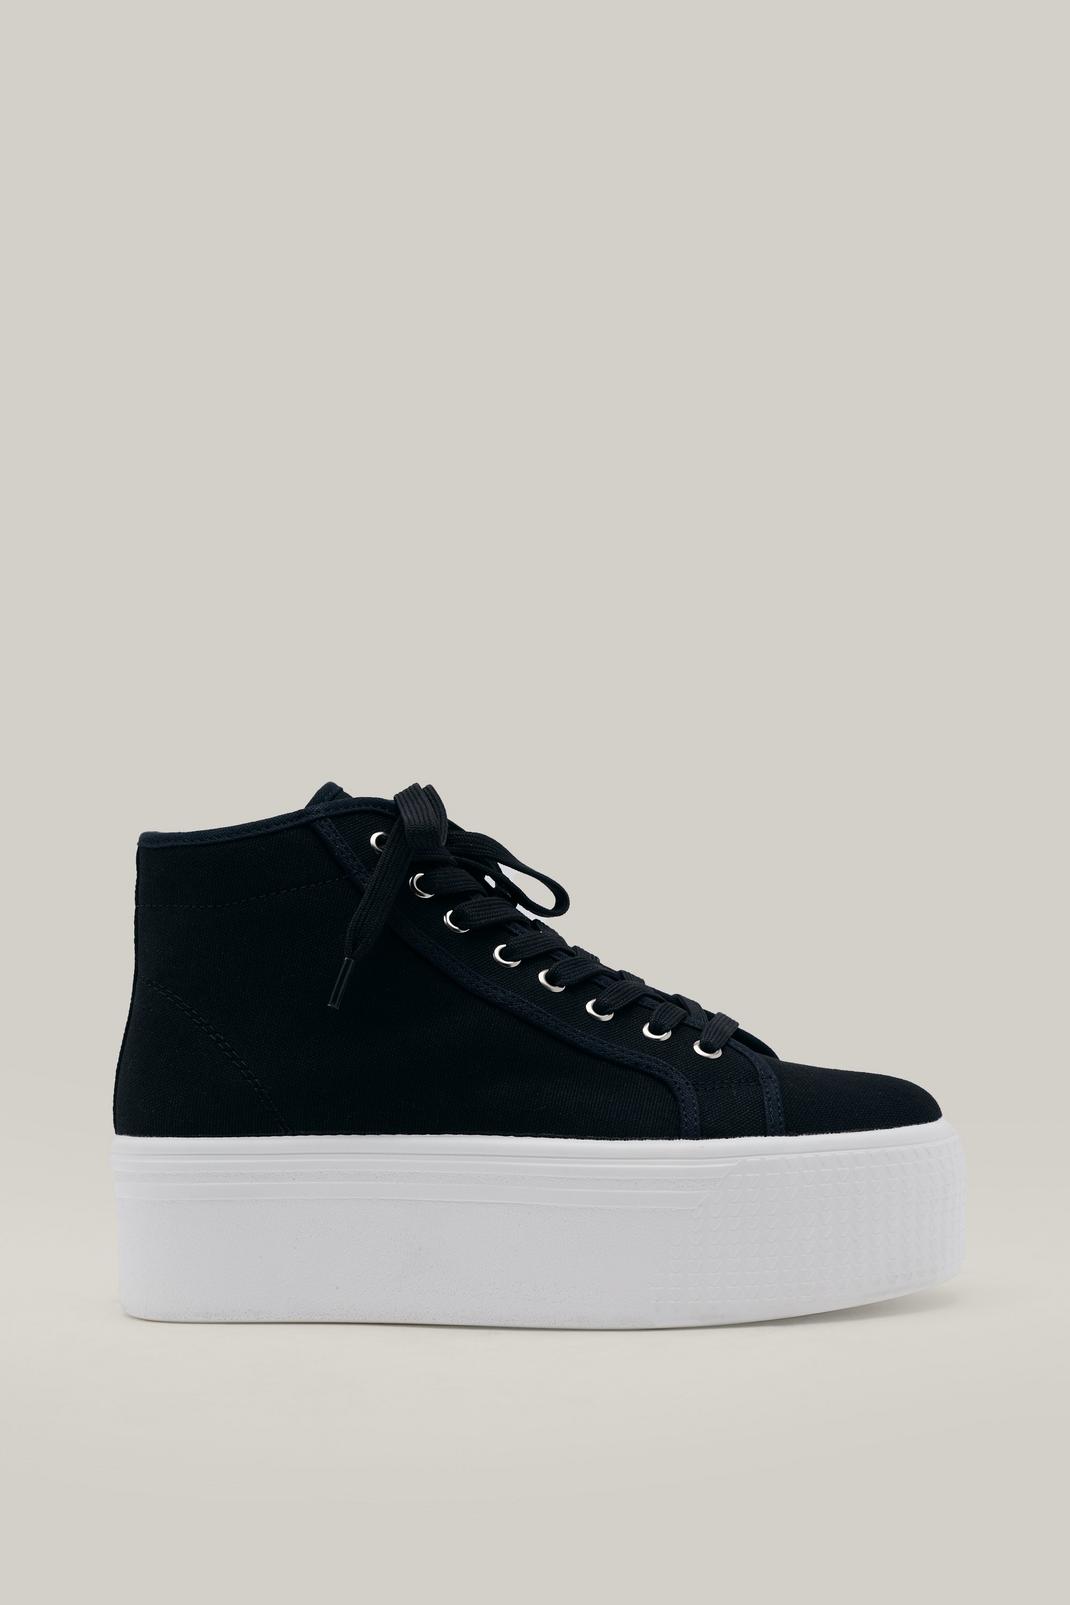 Black High Top Flatform Lace Up Canvas Sneakers image number 1